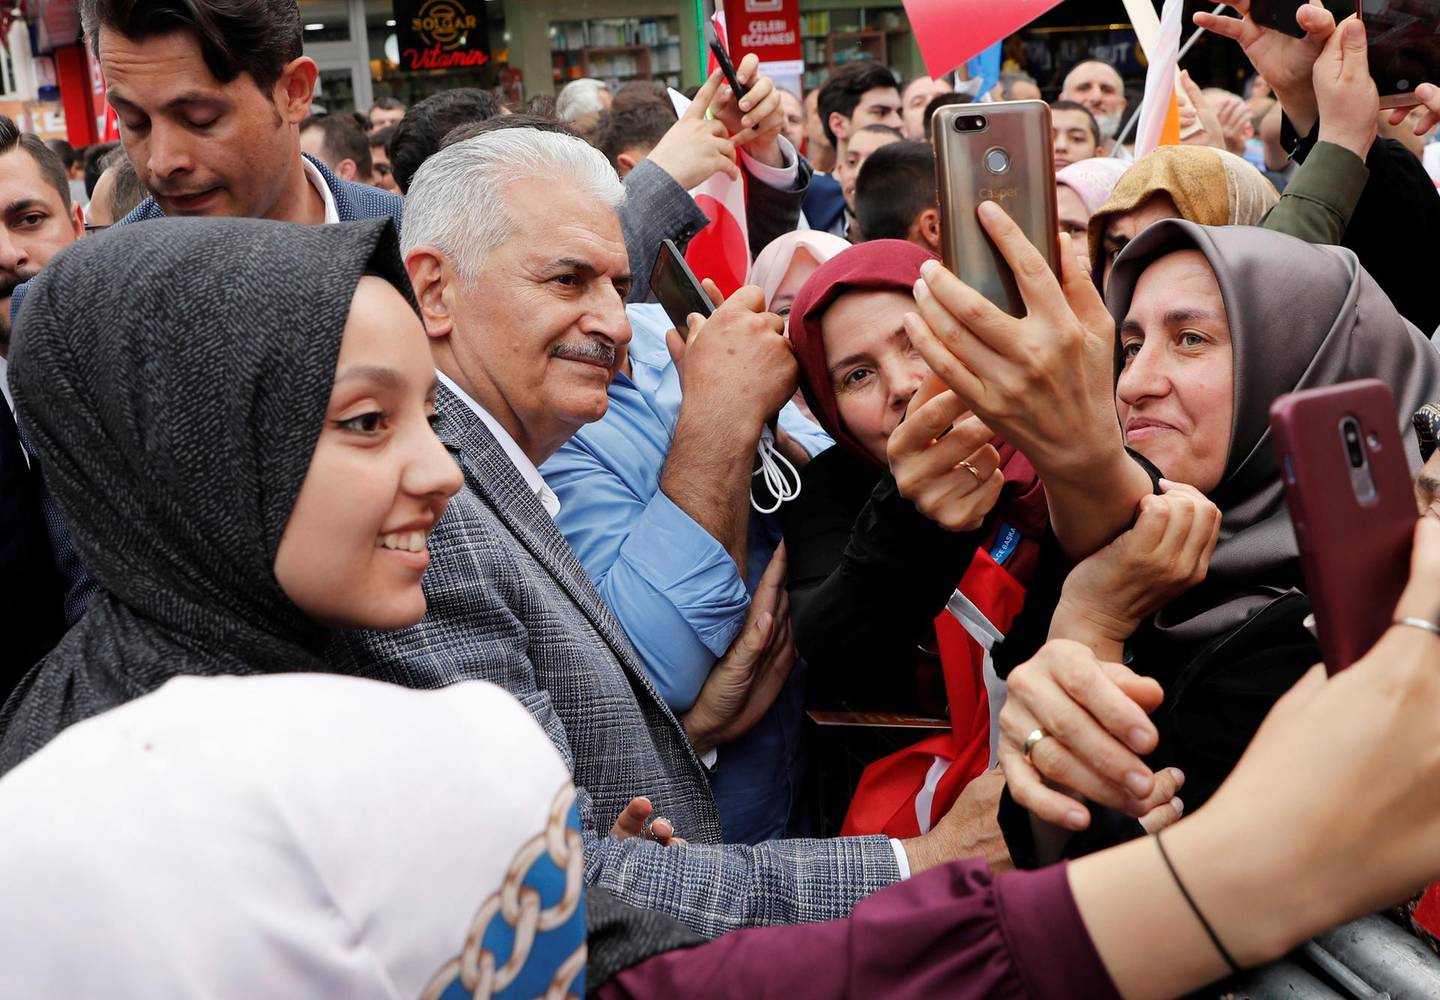 Binali Yildirim, Istanbul mayoral candidate of the ruling AK Party (AKP), poses for a selfie with his supporters during an election rally in Istanbul, Turkey, June 21, 2019. REUTERS/Murad Sezer